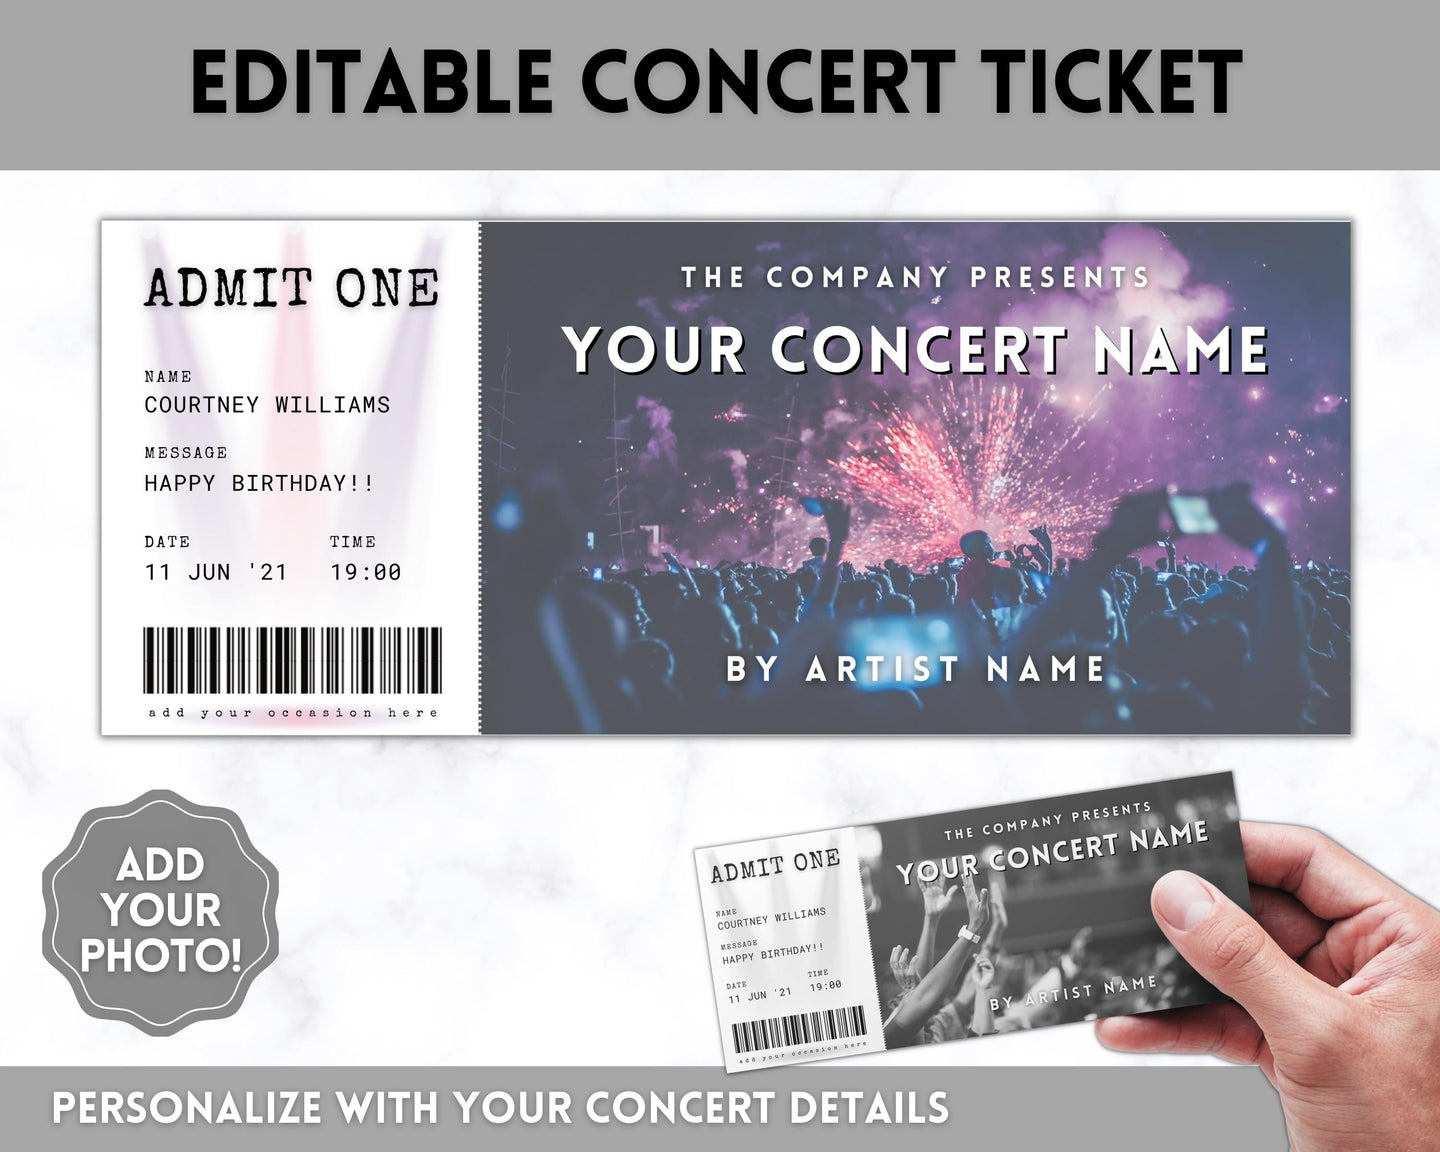 EDITABLE Concert Ticket Template, Surprise Getaway gift, Invitation, Birthday for her, Anniversary Gift for him, Musical Event, Theatre Show | Style 2